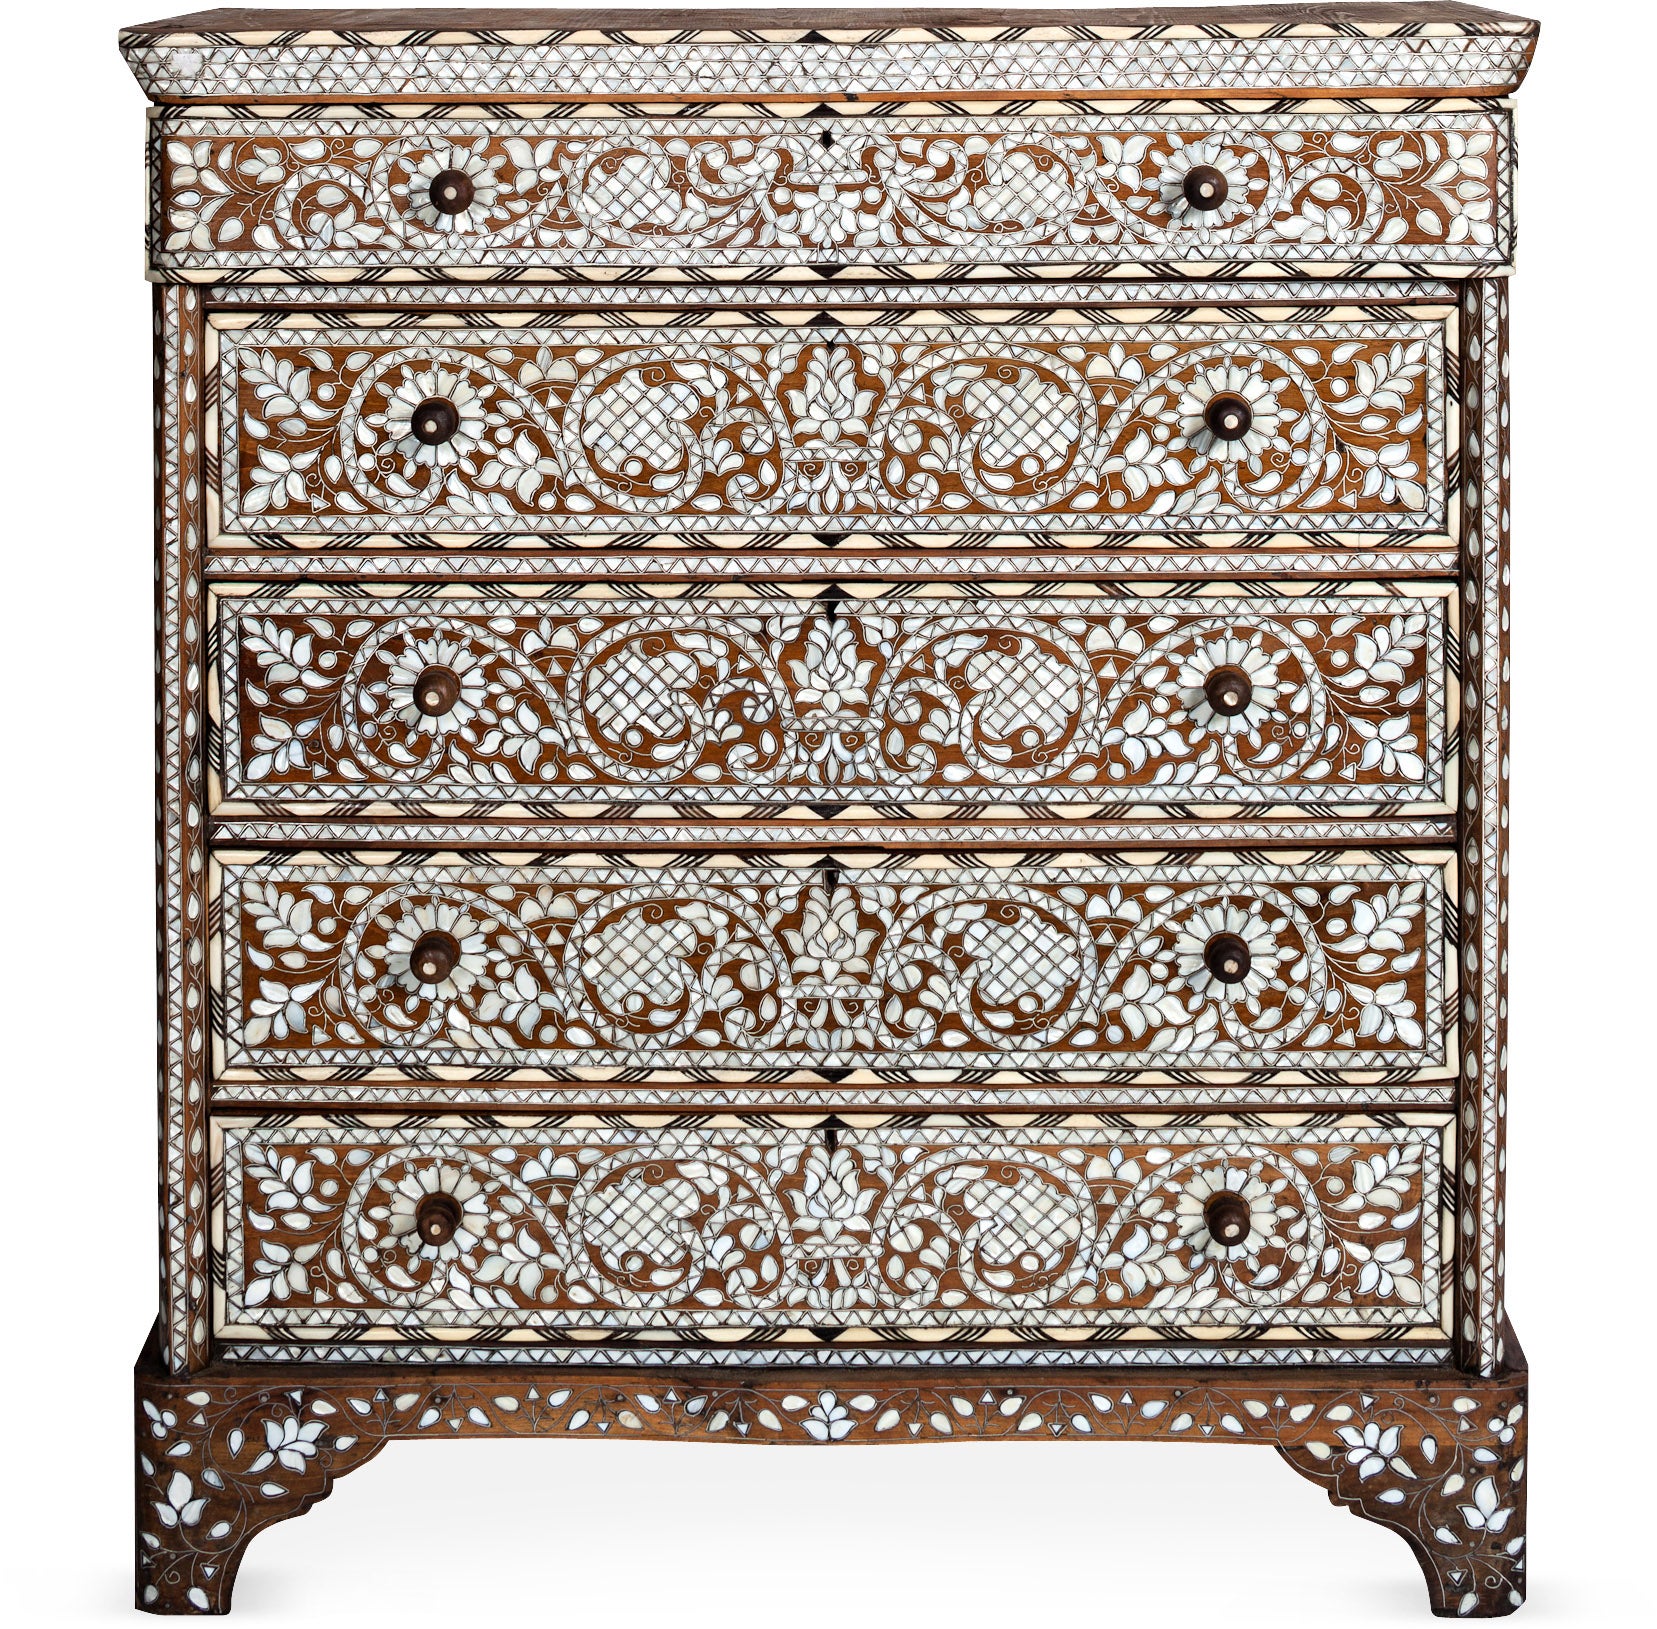 An Ornate Mother-of-Pearl and Bone Inlay Dresser